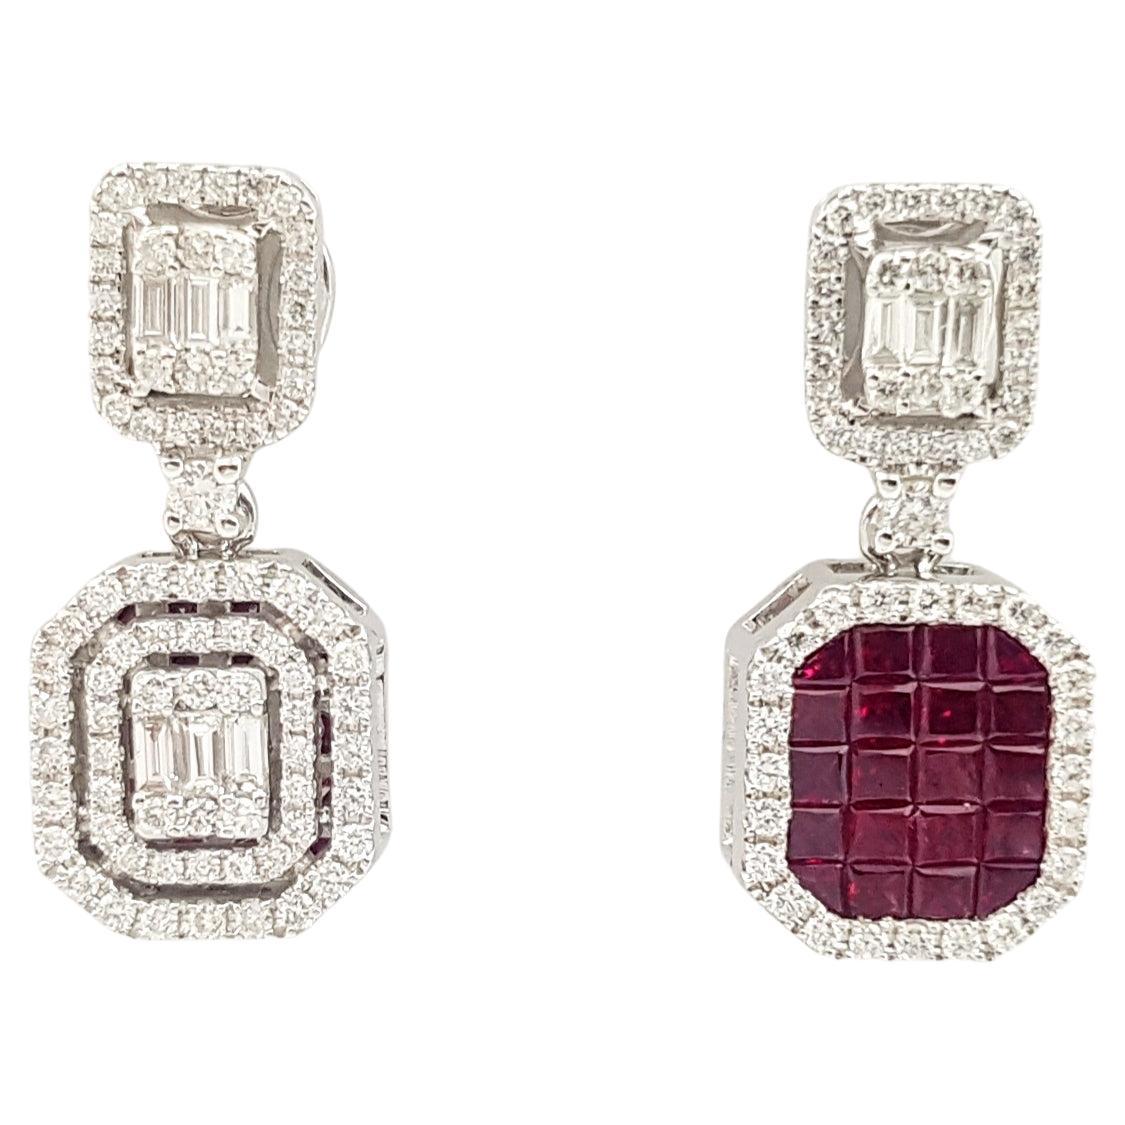 Cabochon Ruby, Ruby with Diamond Earrings Set in 18 Karat White Gold ...